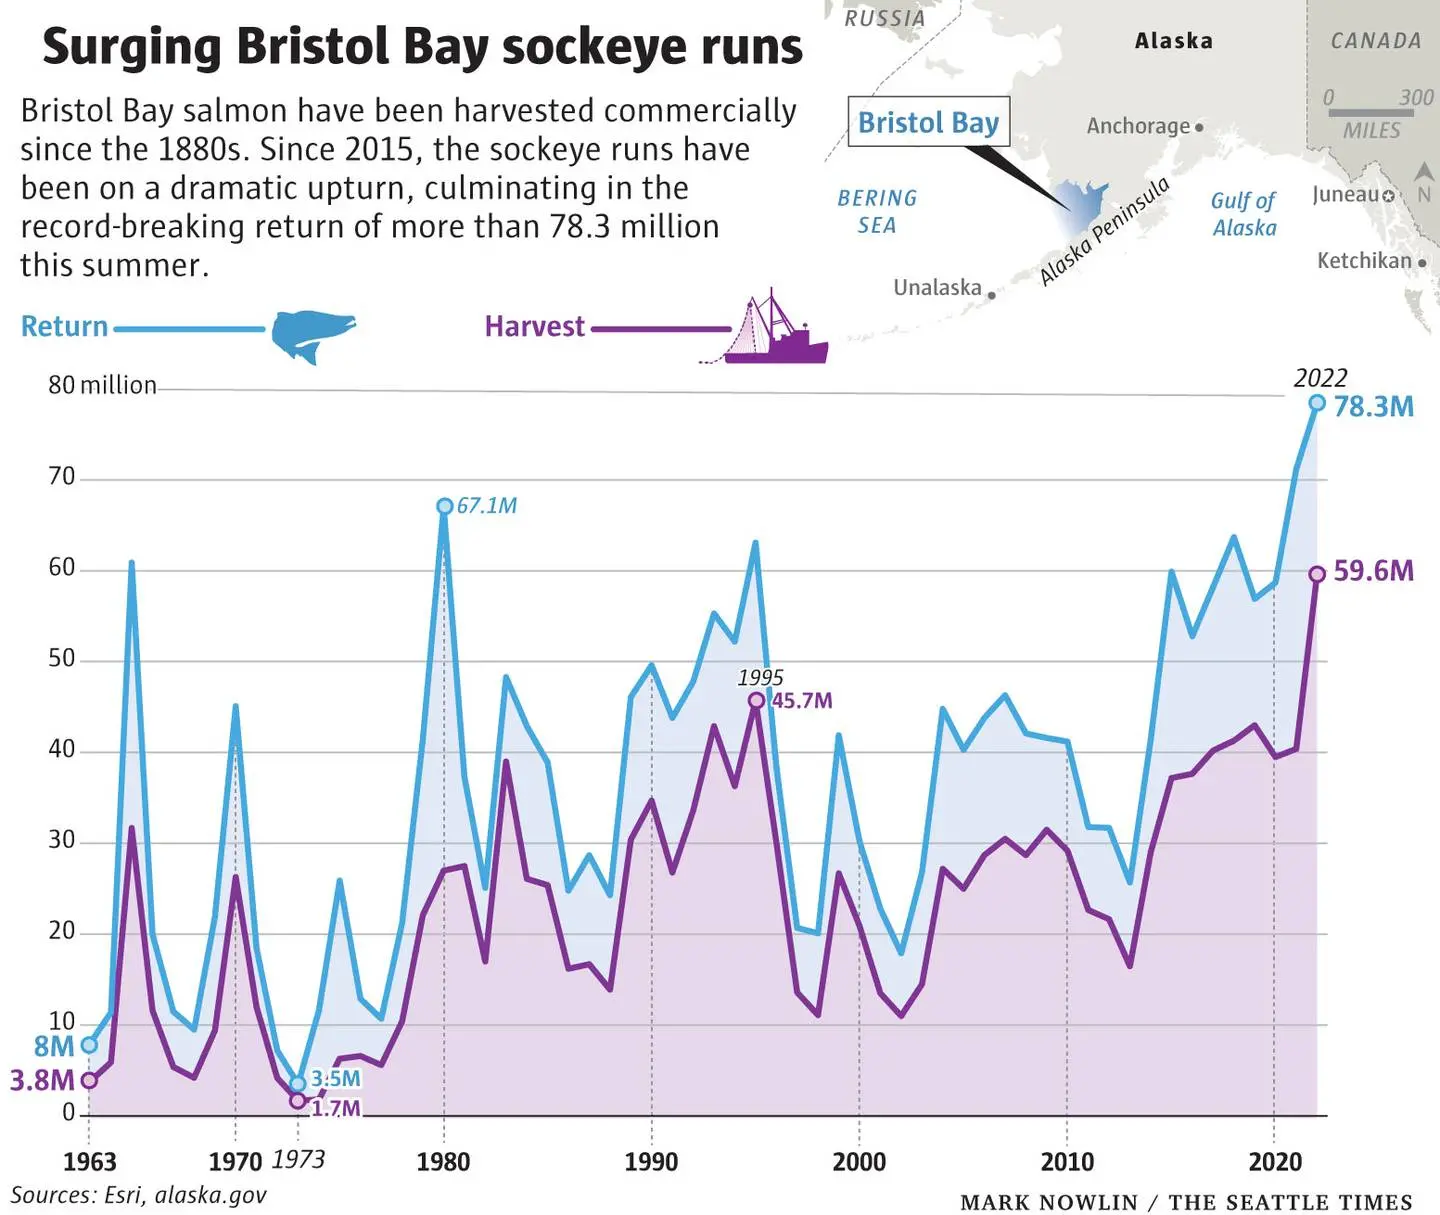 A graph titled "Surging Bristol Bay sockeye runs" reads: Bristol Bay salmon have been harvested commercially since the 1880s. Since 2015, the sockeye runs have been on a dramatic upturn, culminating in the record-breaking return of more than 78.3 million this summer. The return line stays parallel and below the harvest line consistently, from 1963 to 2020. 1973 has a low of 1.7M catch, 2022 has a high of 59.6M catch. 